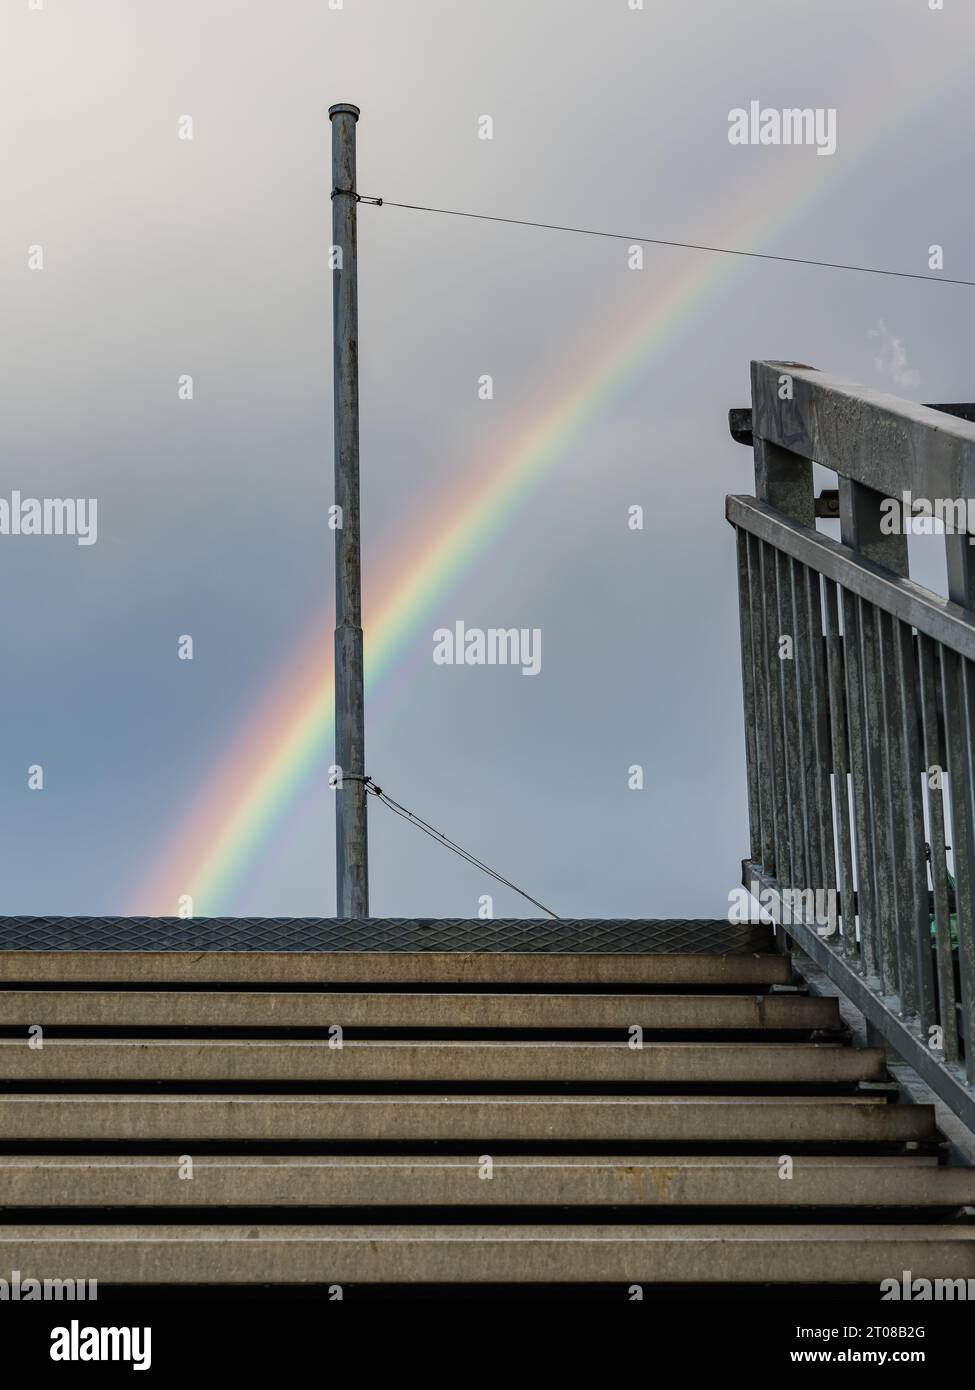 Vibrant rainbow sky above stairs in Gothenburg, Sweden. Stock Photo